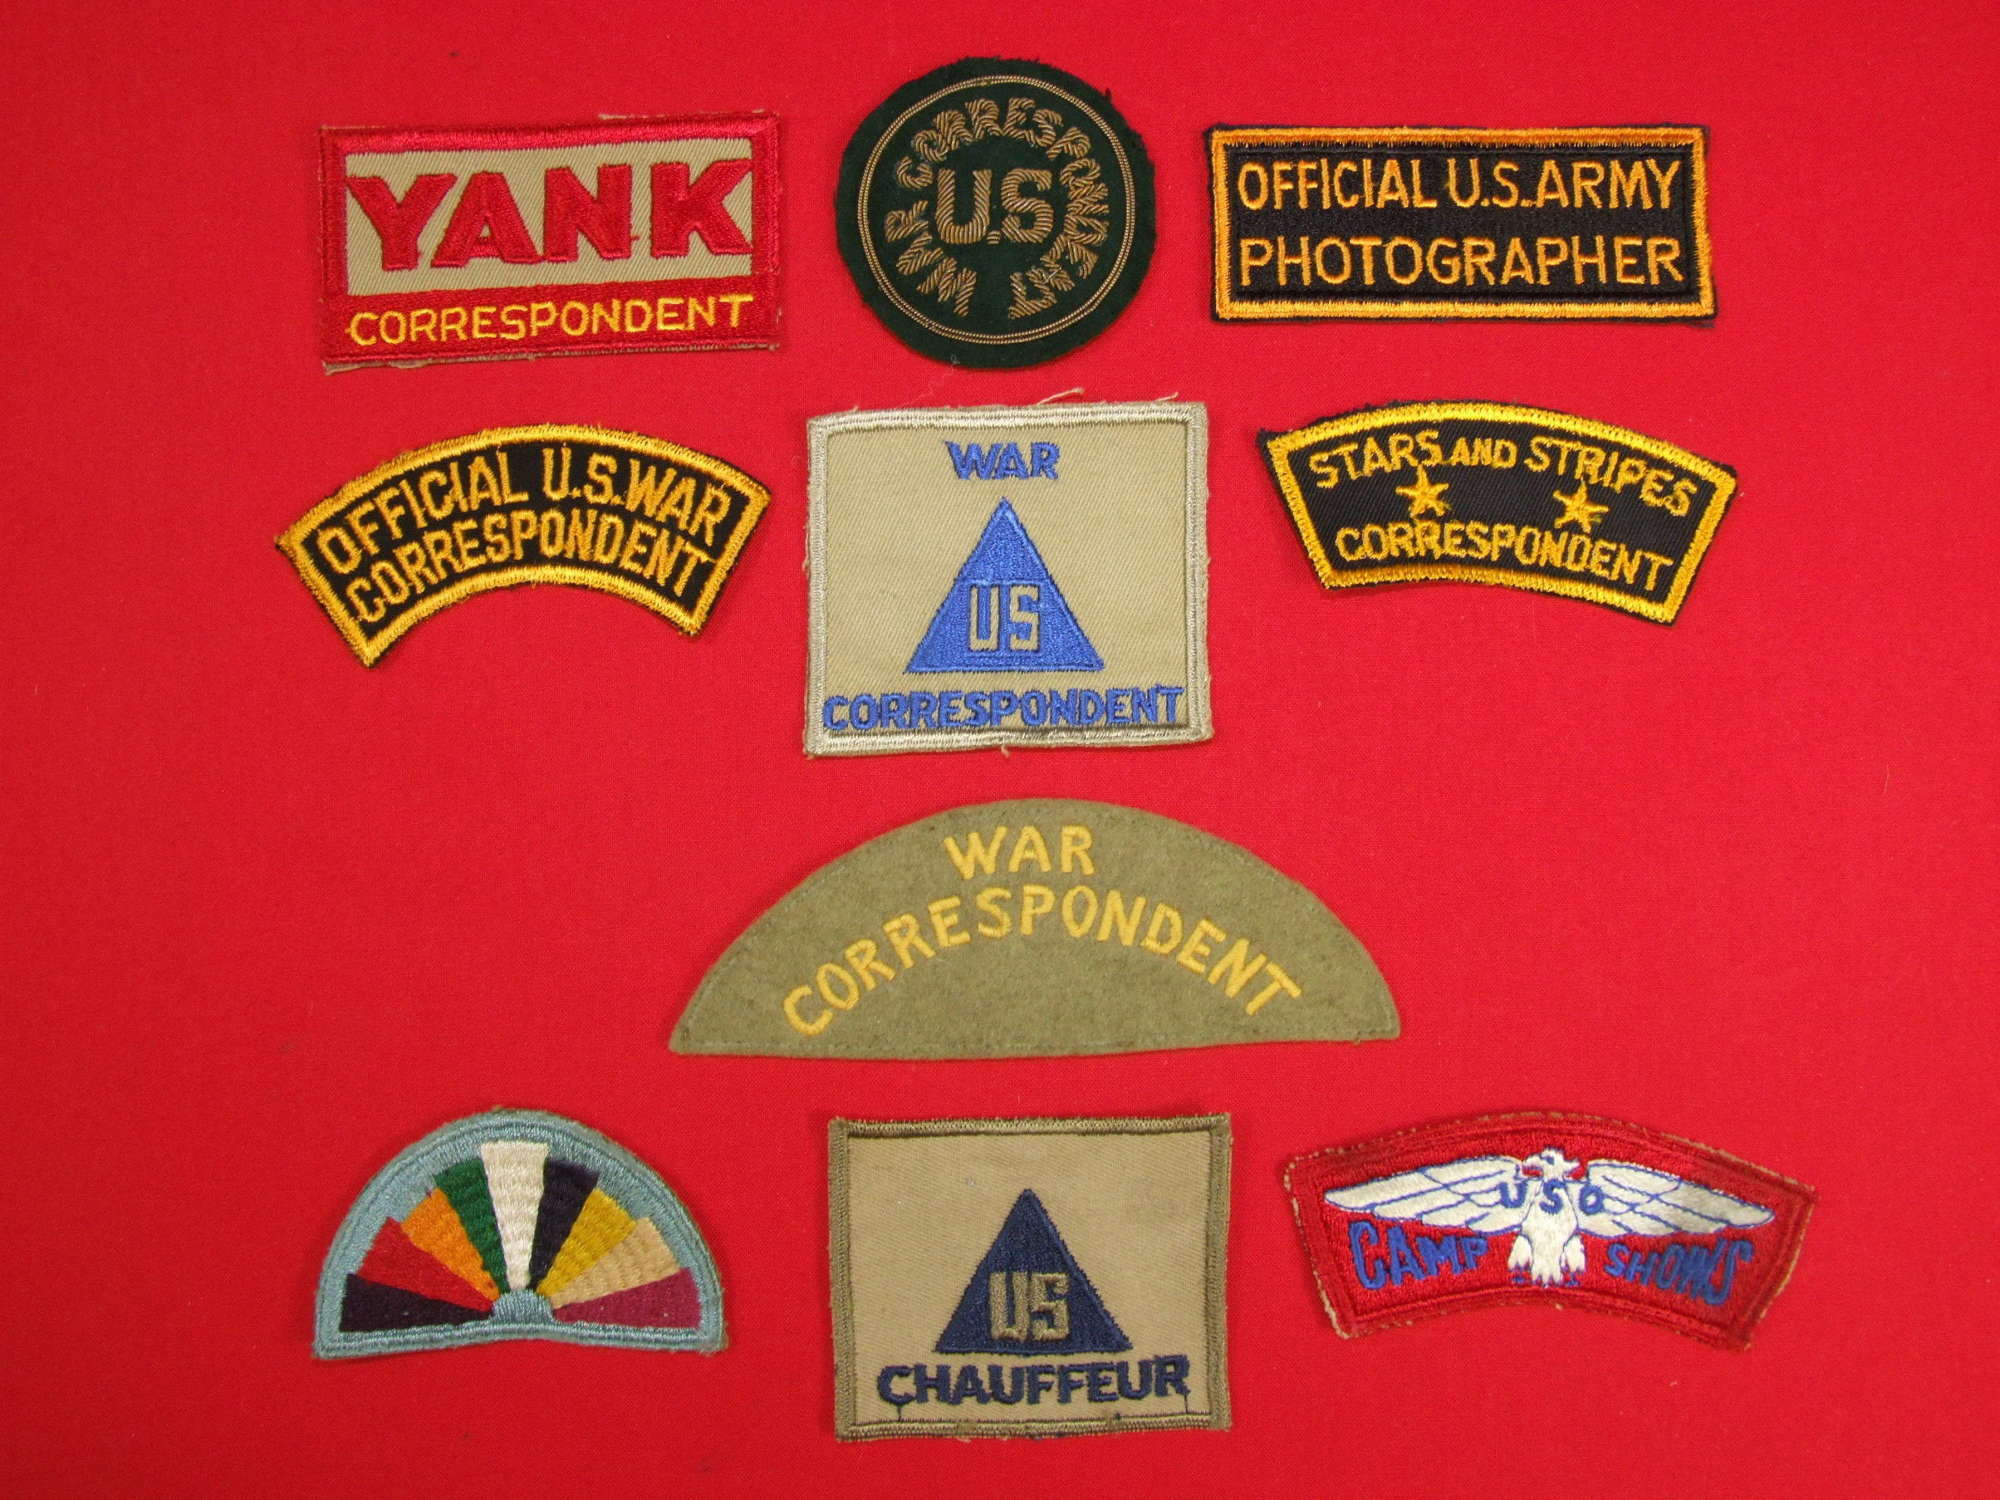 A collection of 7 U.S War Correspondent badges and 3 others.